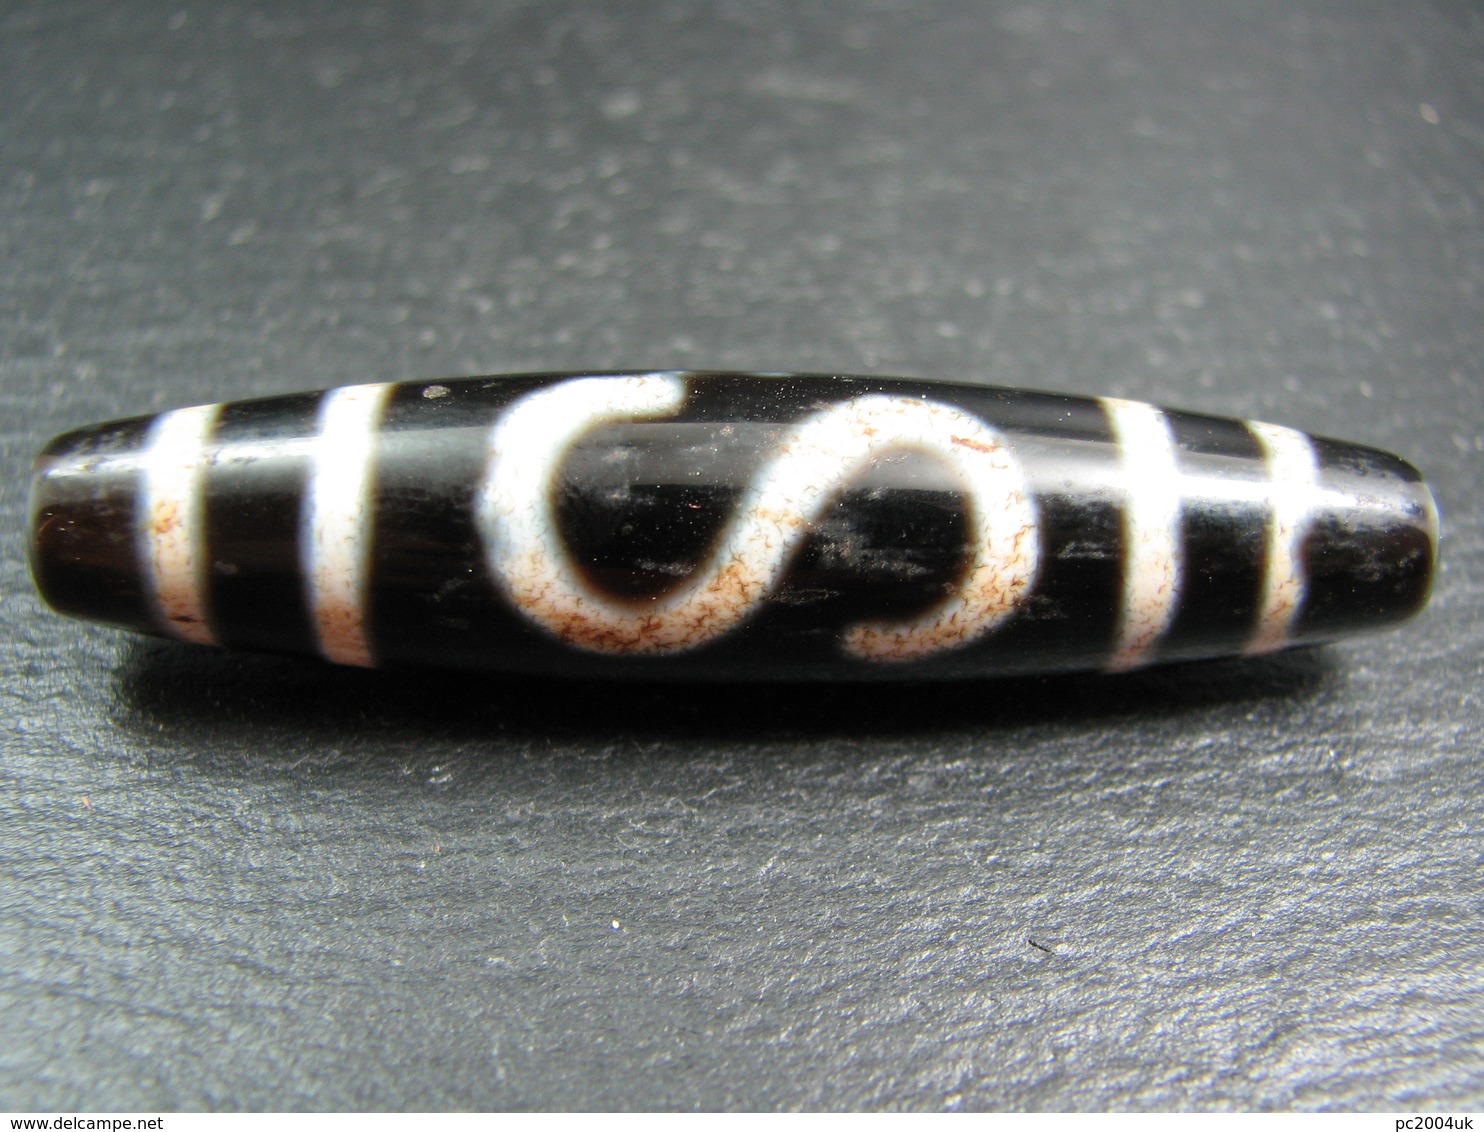 FREE SHIPPING. An Agate Dzi Bead With A Double Money Hook Pattern From Tibet / Nepal FREE SHIPPING. - Archeologia